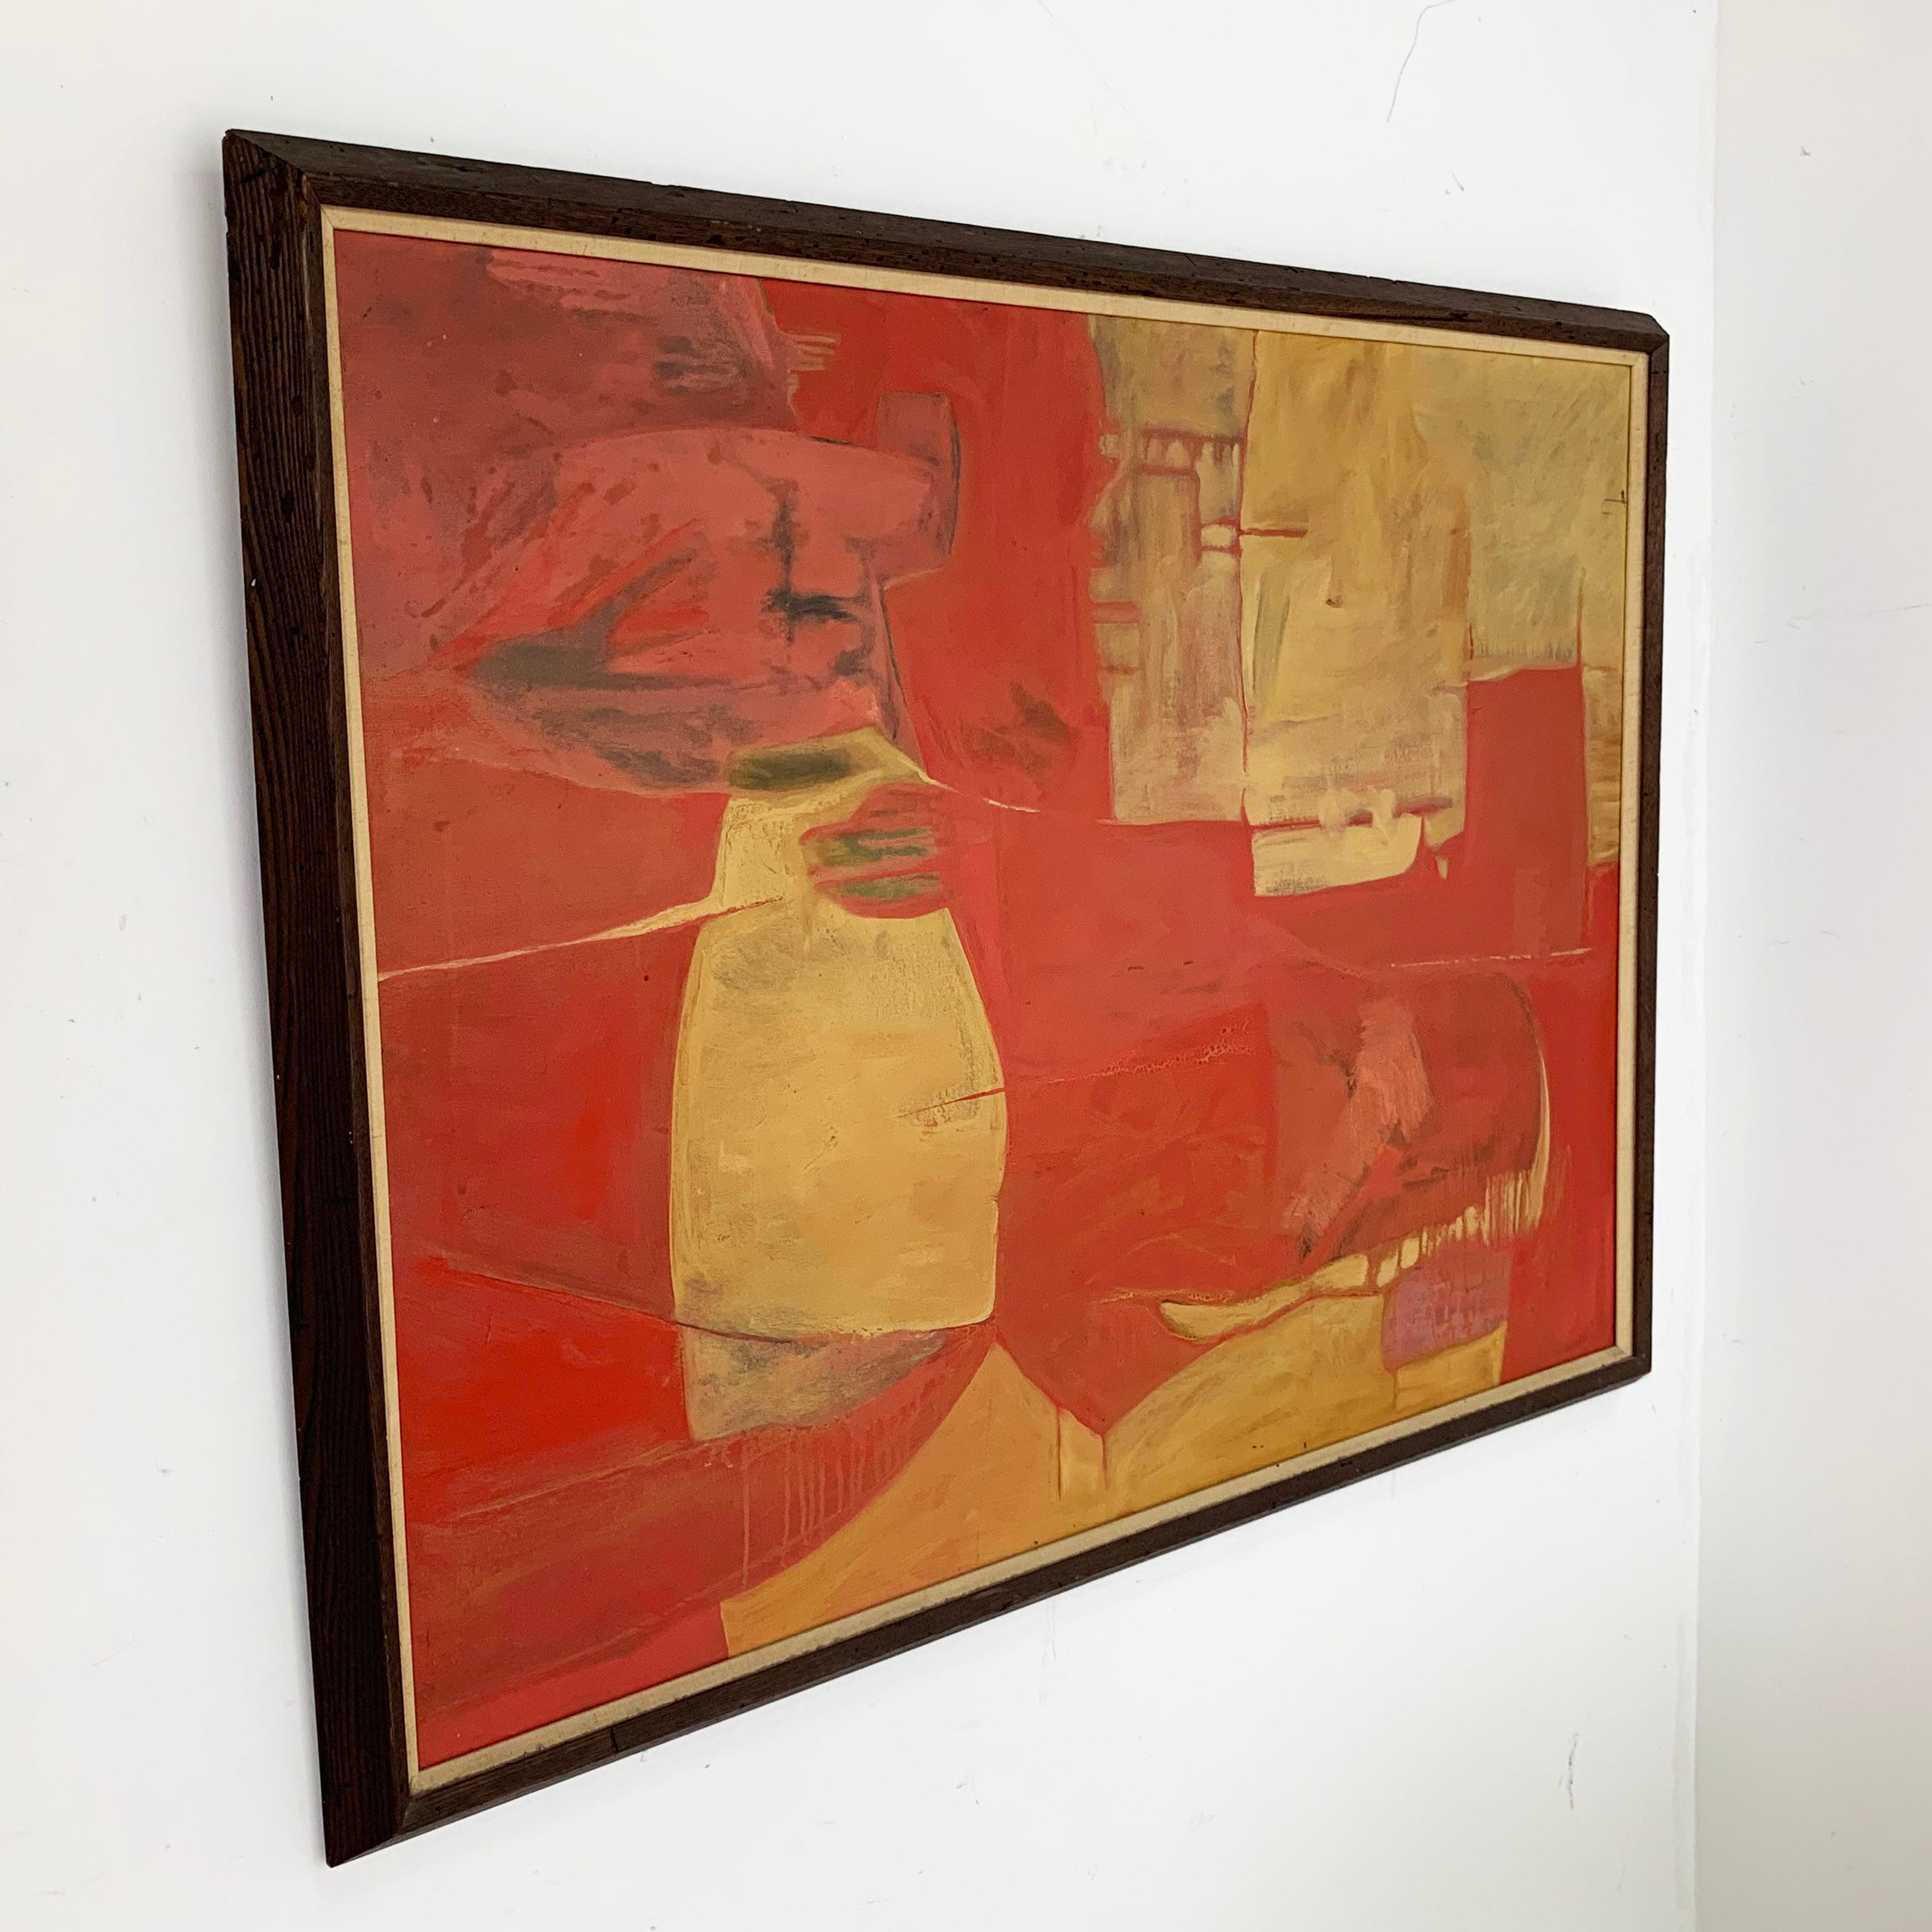 Modernist abstract painting by Sy Rudman. Rudman was an active New York artist who designed many 1950s era jazz album covers and worked as the art director of Argosy magazine, before retiring in his later years to Amherst, MA.